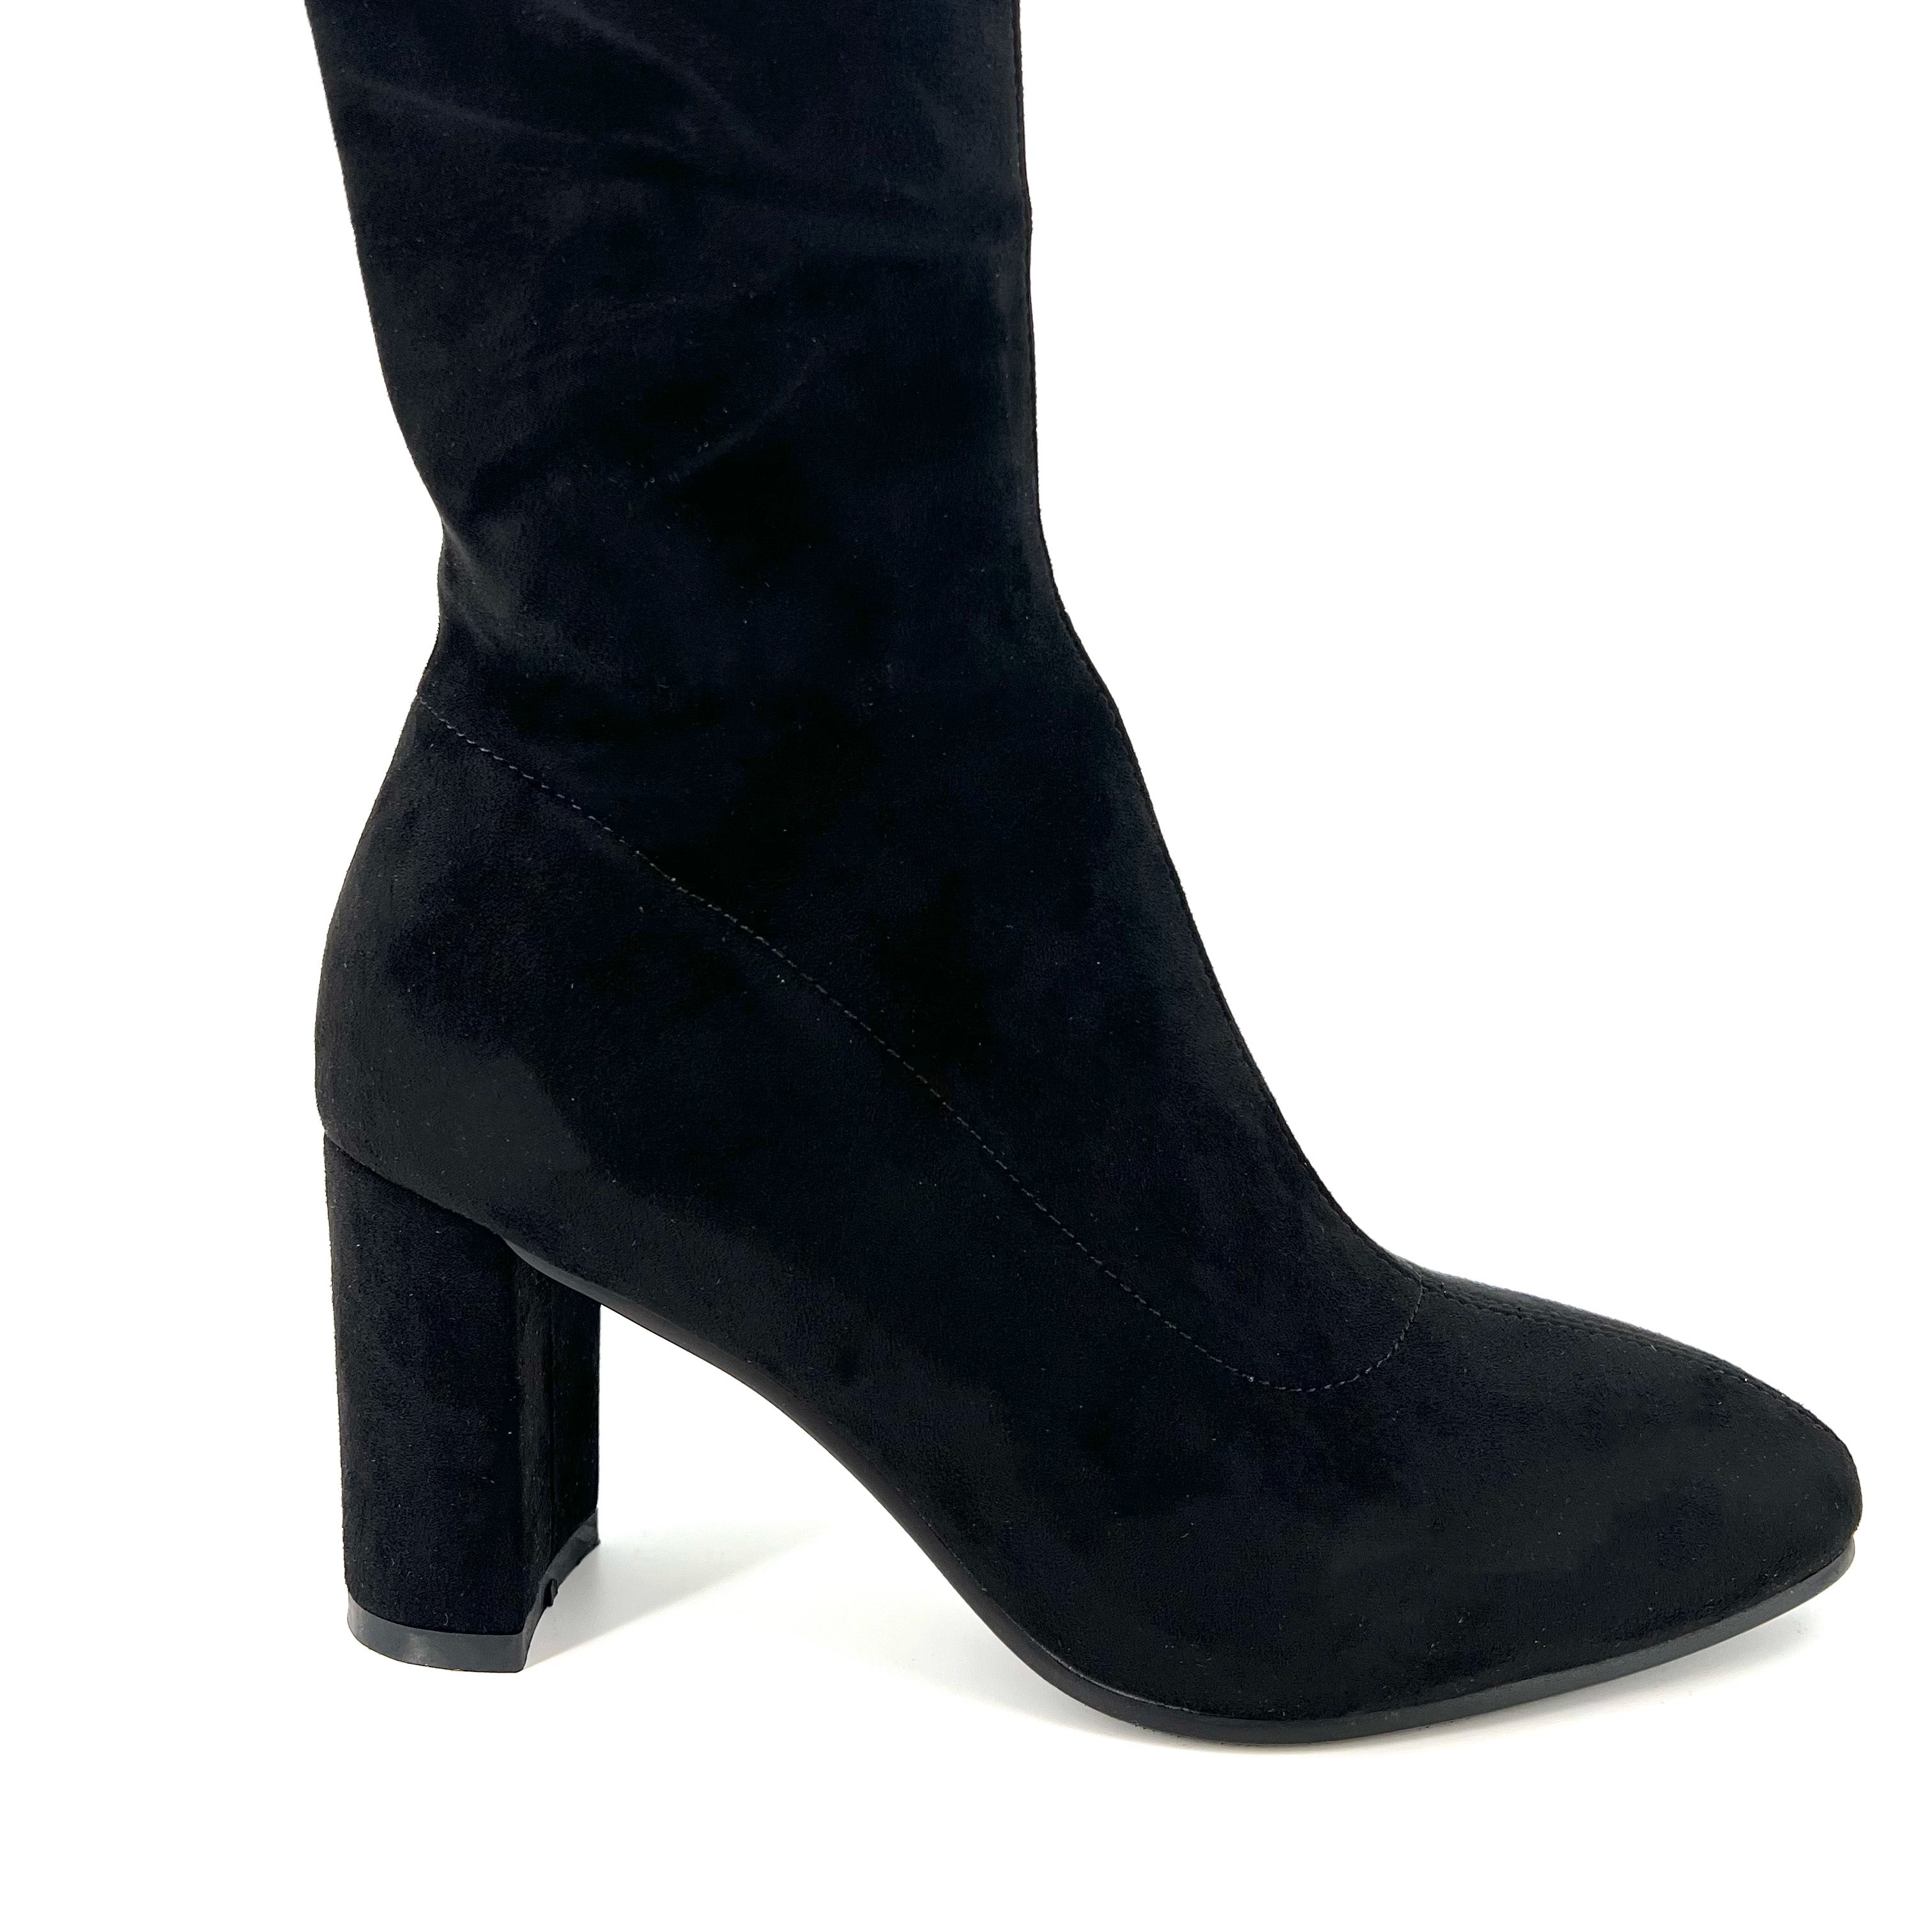 The Tall High Heel Stretch Boot in Black